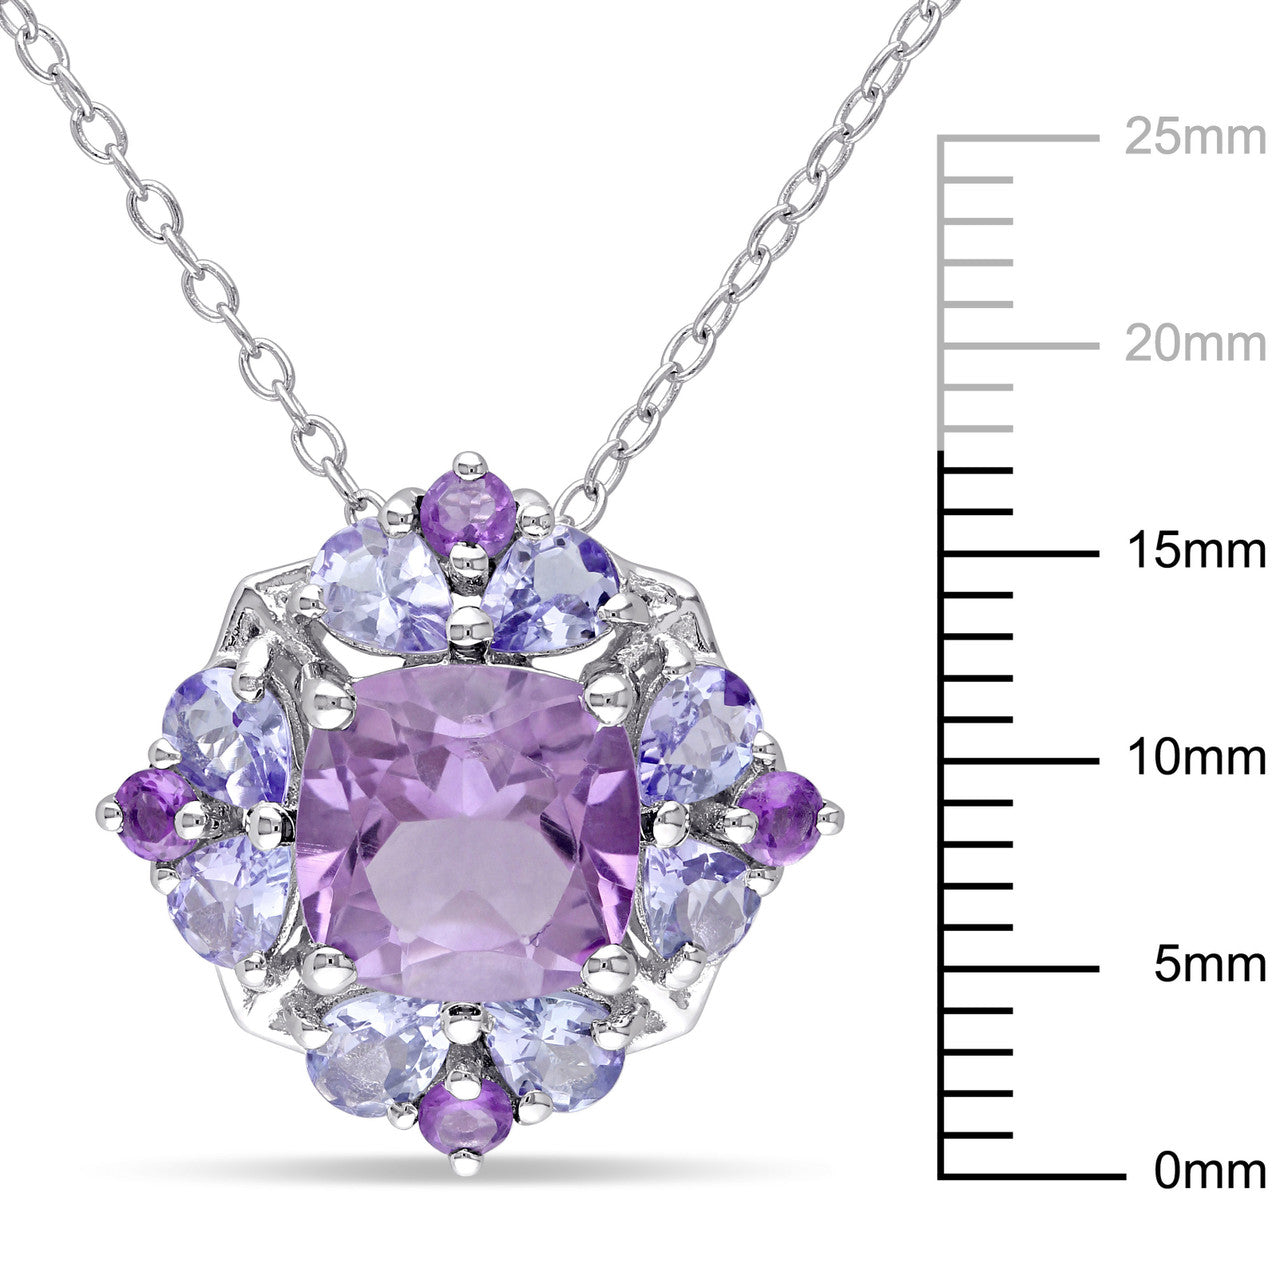 Ice Jewellery 3 CT TW Amethyst And Tanzanite Quatrefoil Floral Pendant With Chain In Sterling Silver - 75000005934 | Ice Jewellery Australia